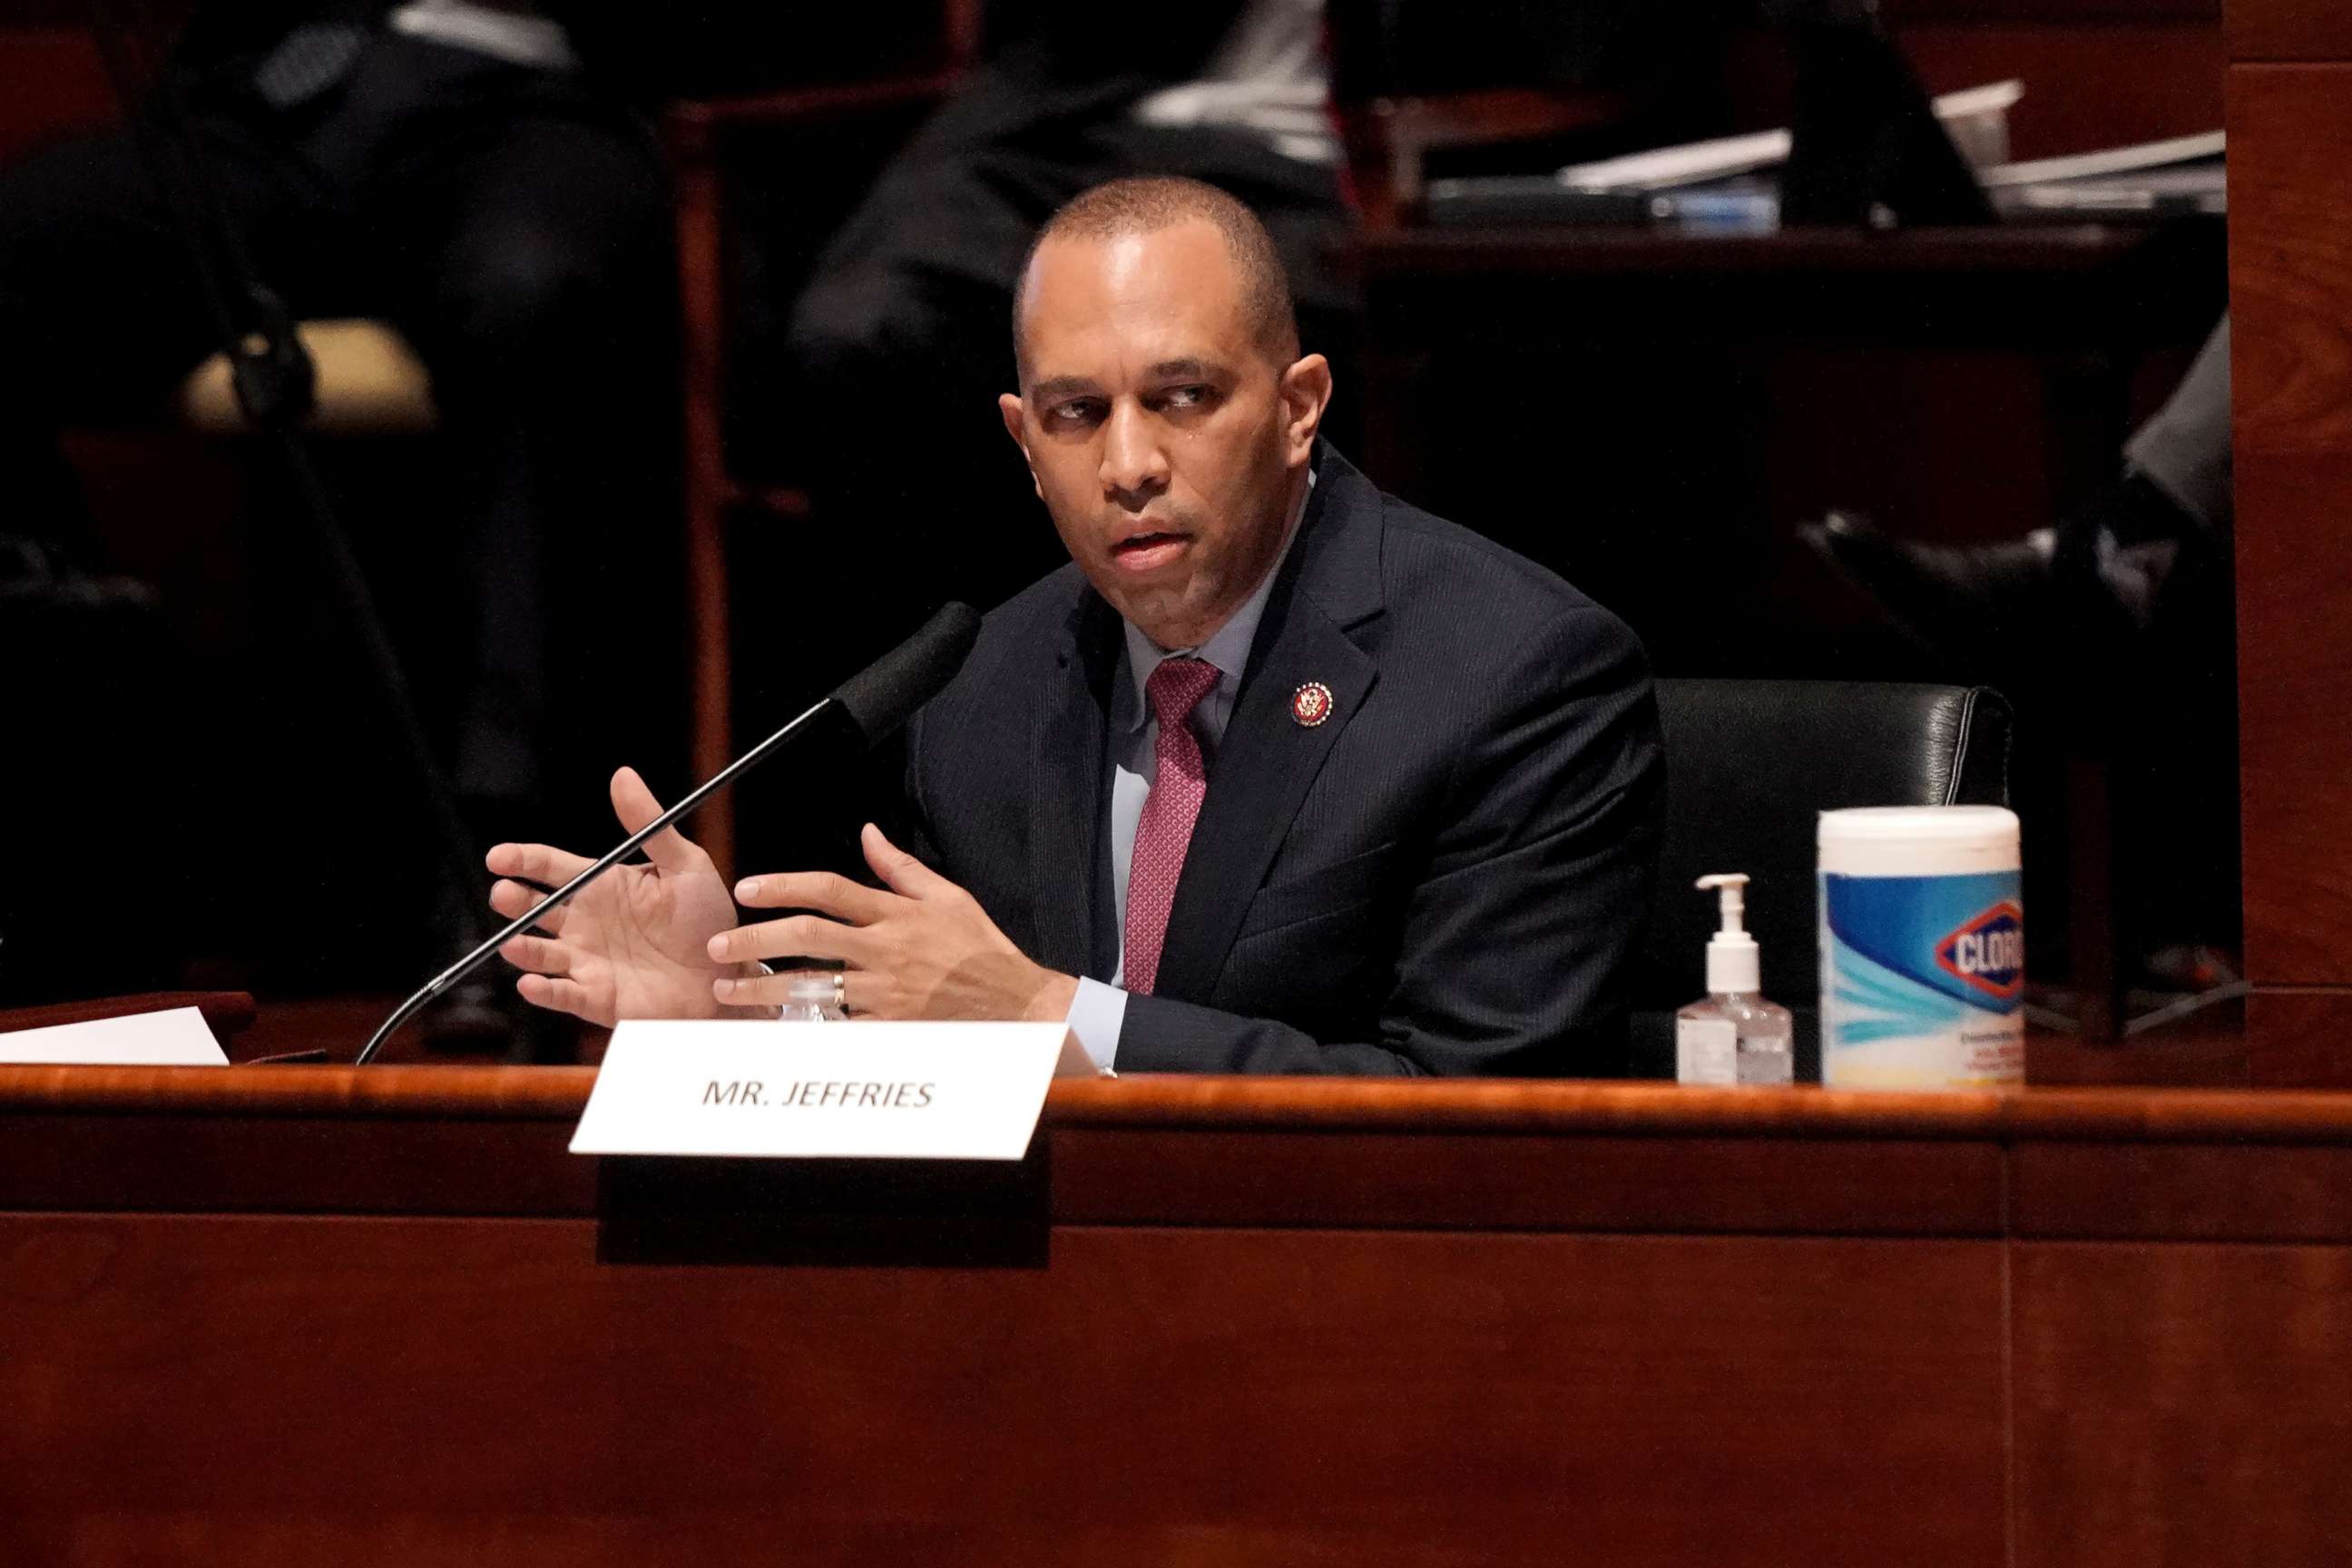 PHOTO: Rep. Hakeem Jeffries asks questions during the U.S. House Judiciary Committee hearing on "Policing Practices and Law Enforcement Accountability" on Capitol Hill in Washington, June 10, 2020.